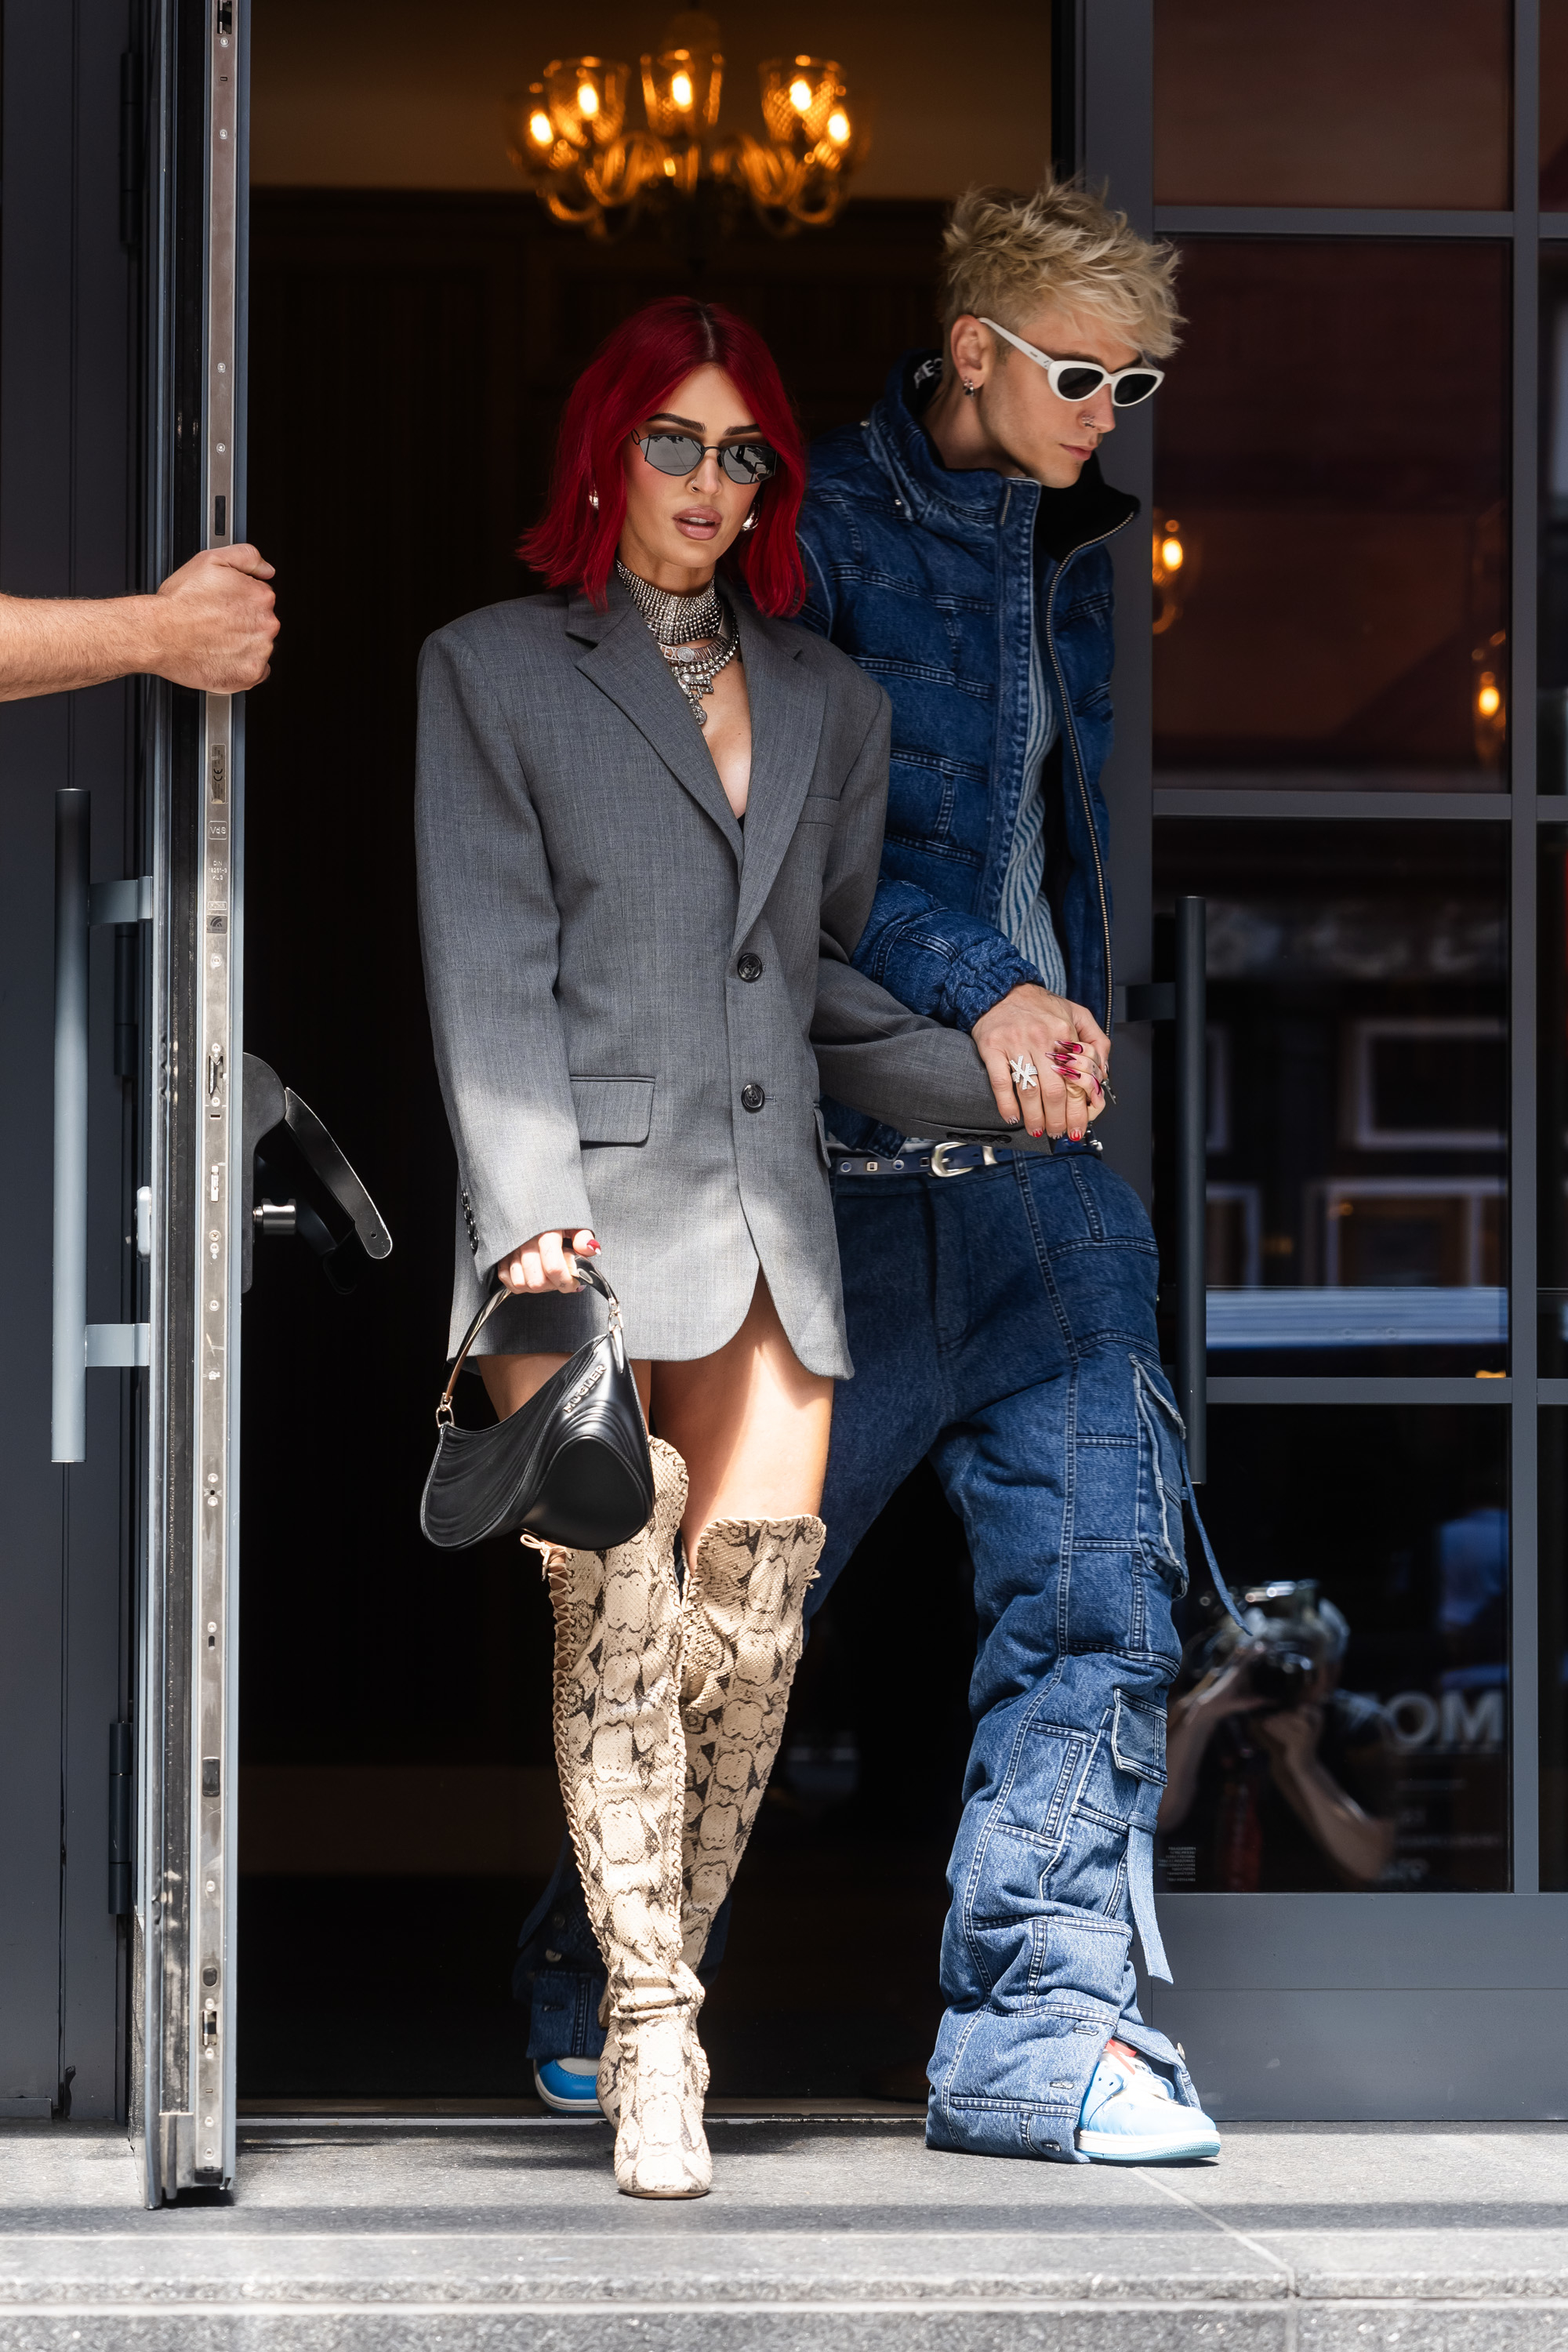 the two walking out of a building holding hands